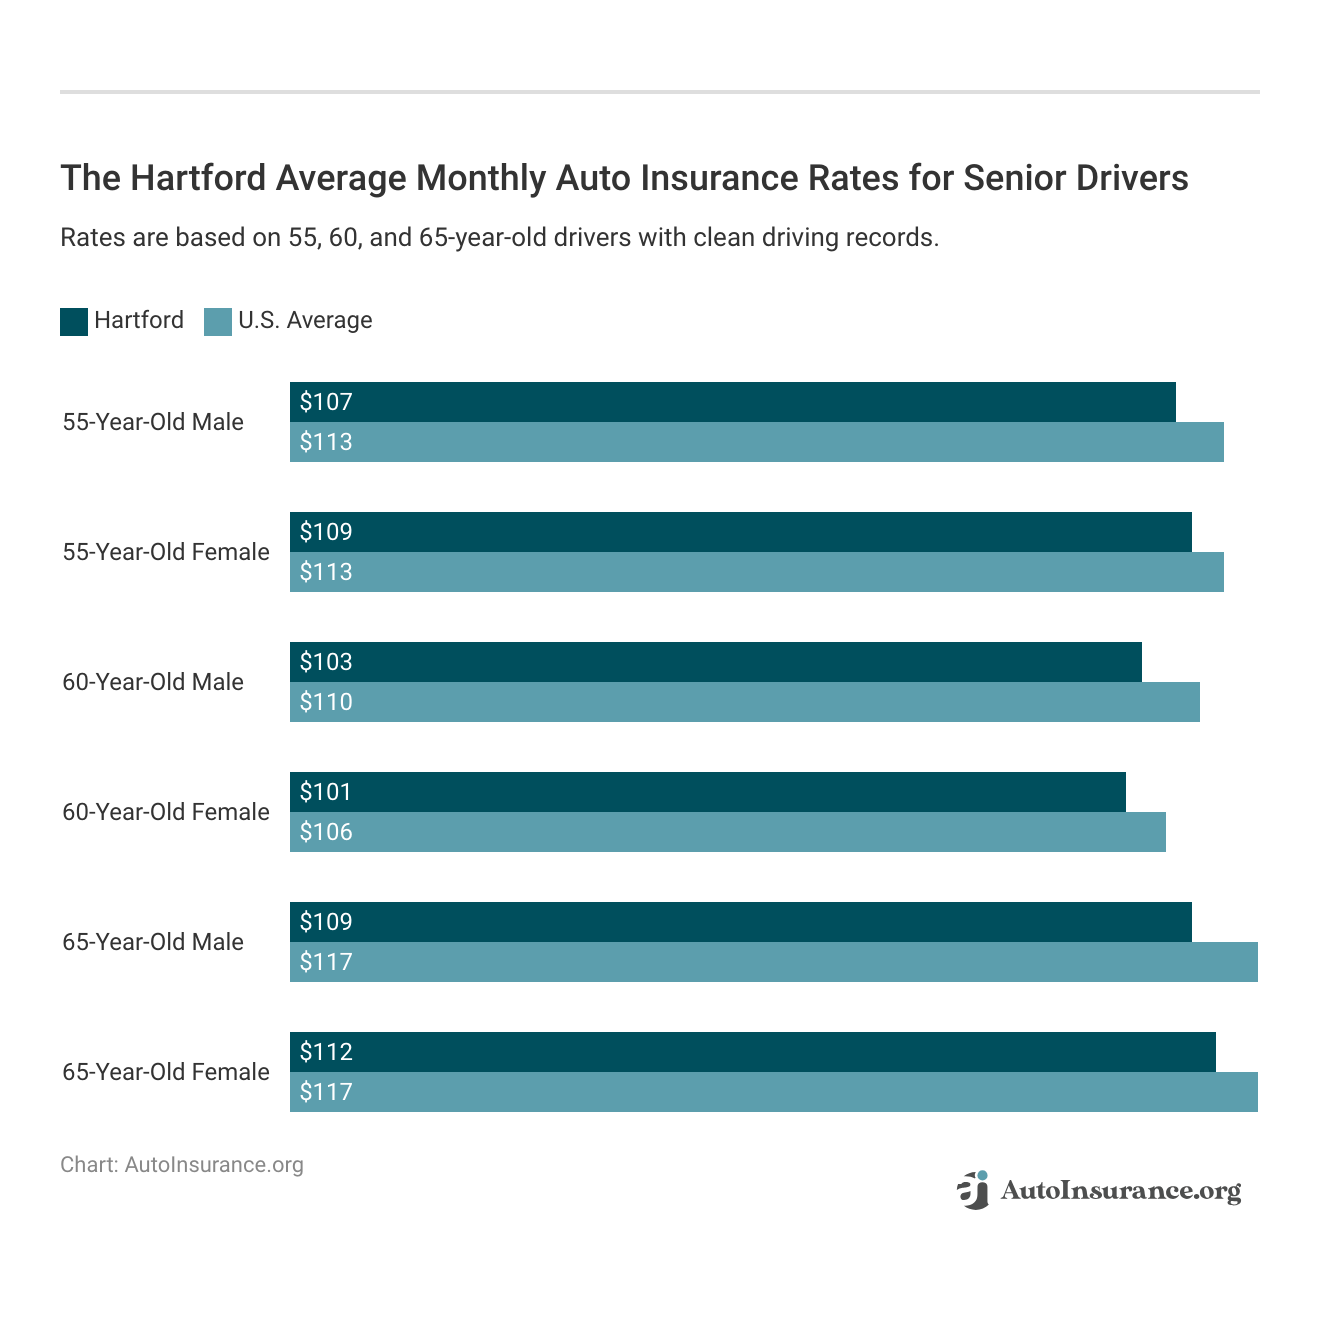 <h3>The Hartford Average Monthly Auto Insurance Rates for Senior Drivers</h3>